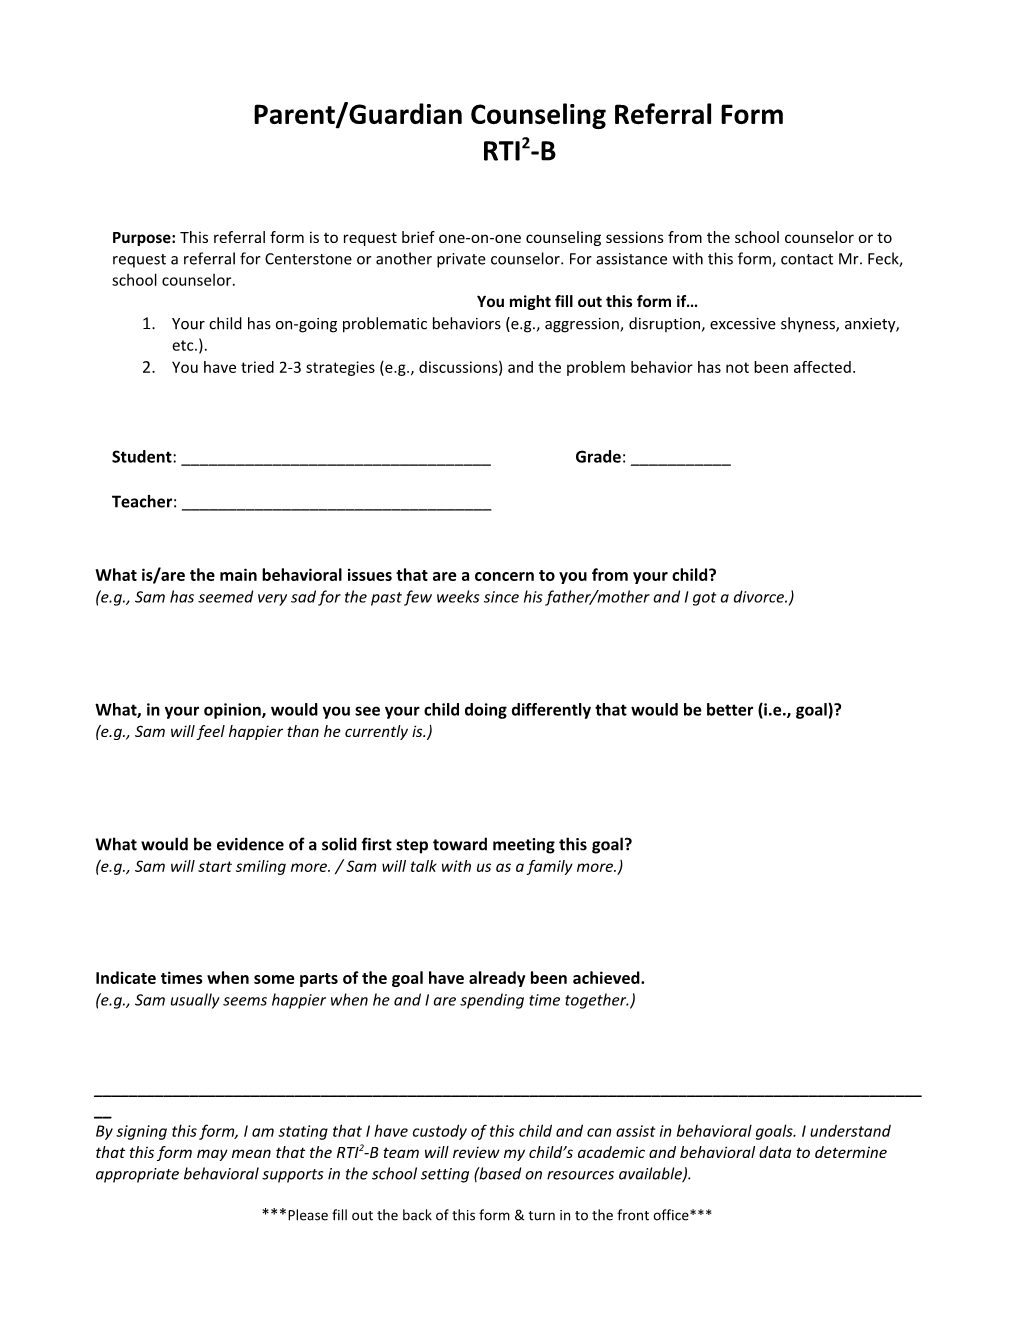 Parent/Guardian Counseling Referral Form